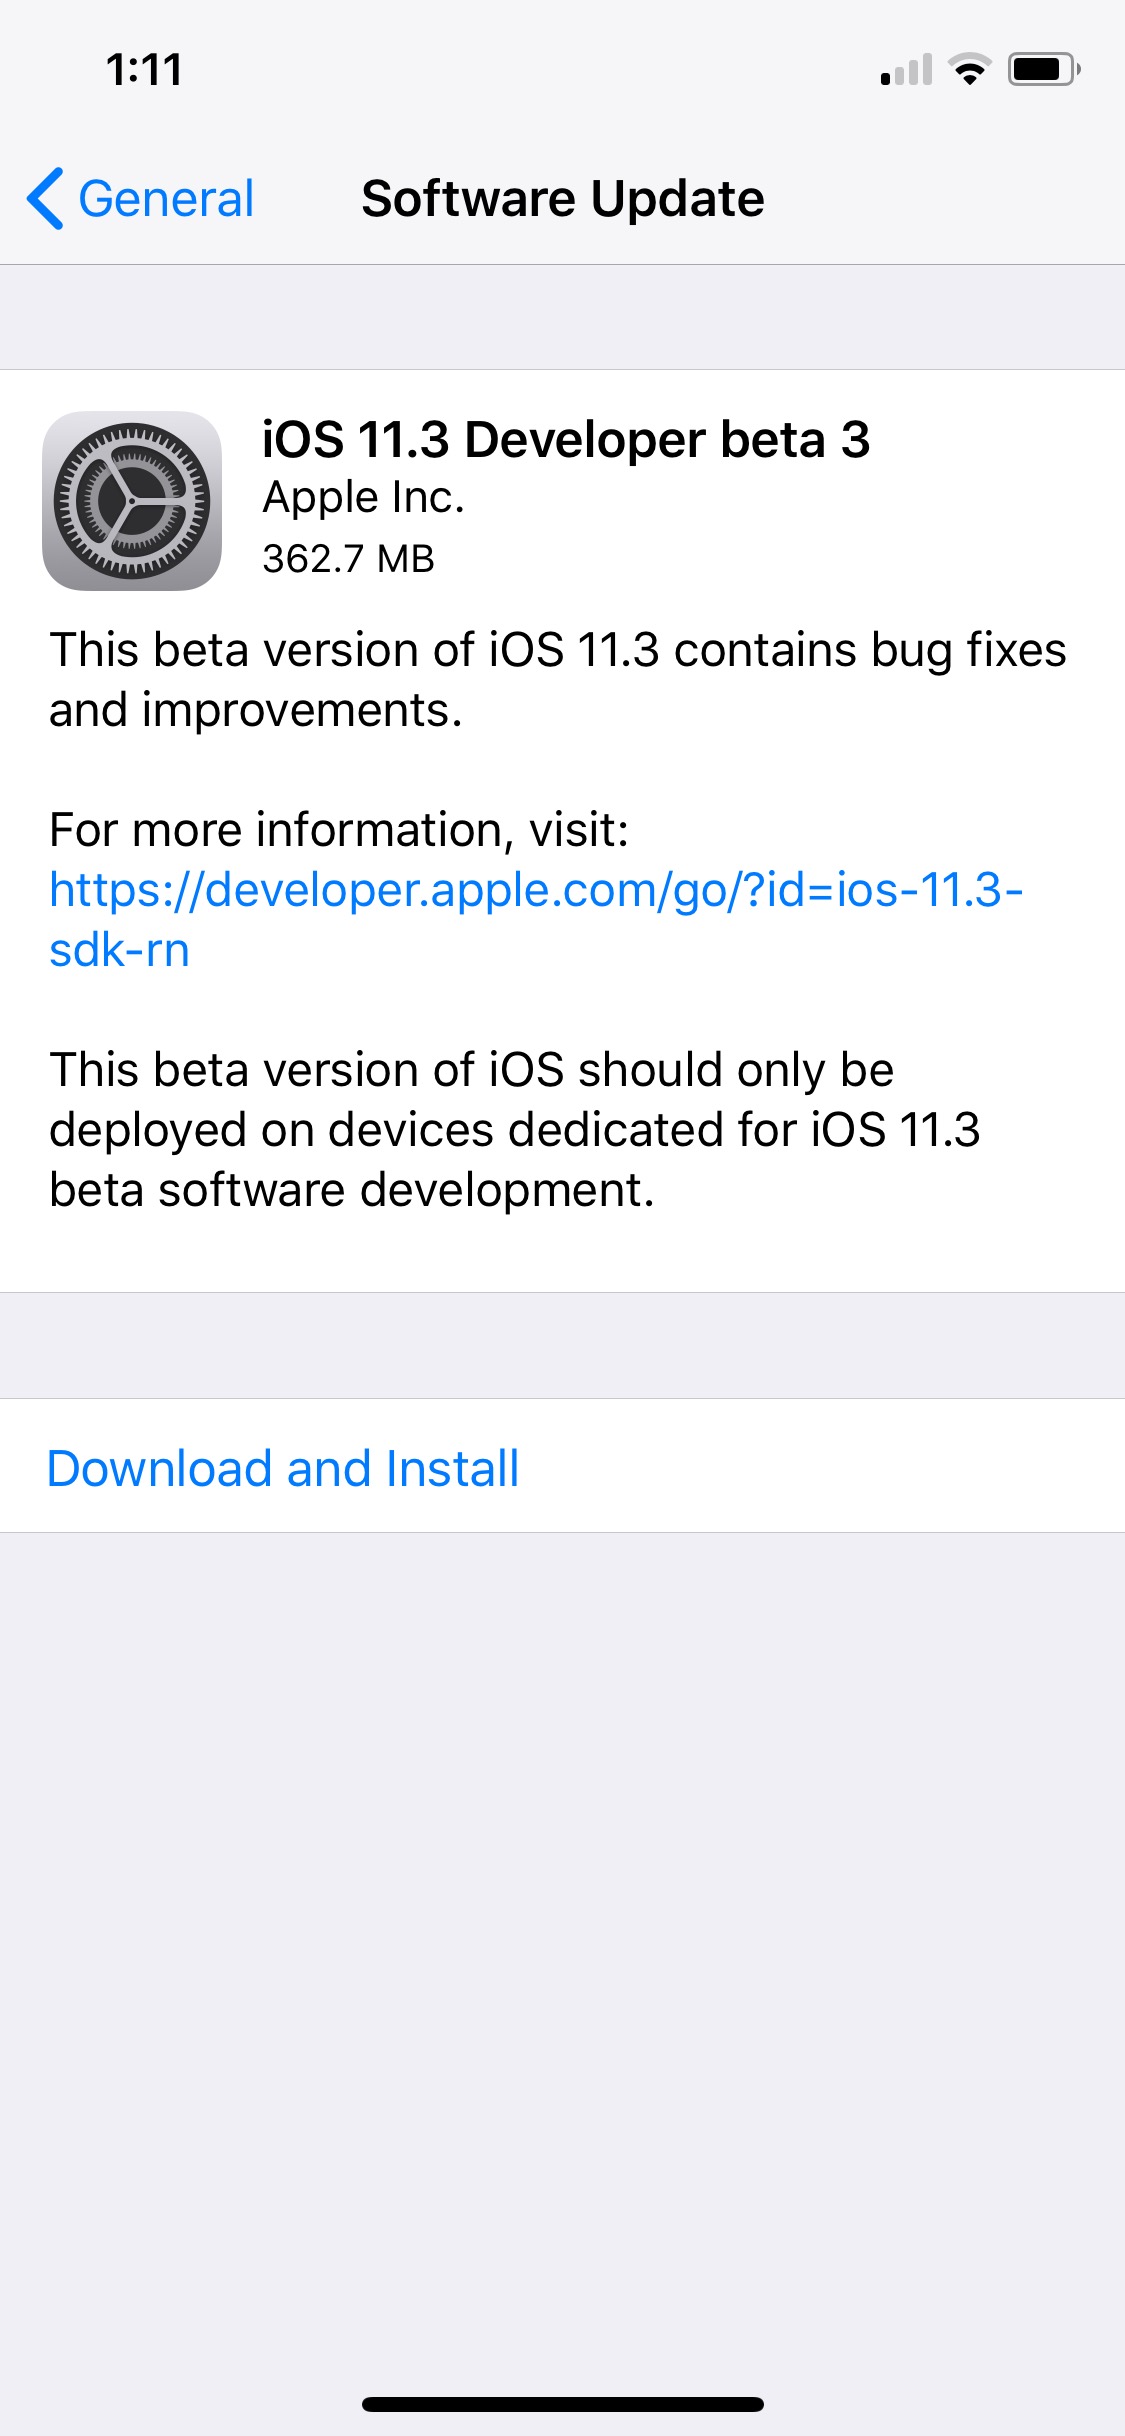 Apple Releases iOS 11.3 Beta 3 to Developers [Download]